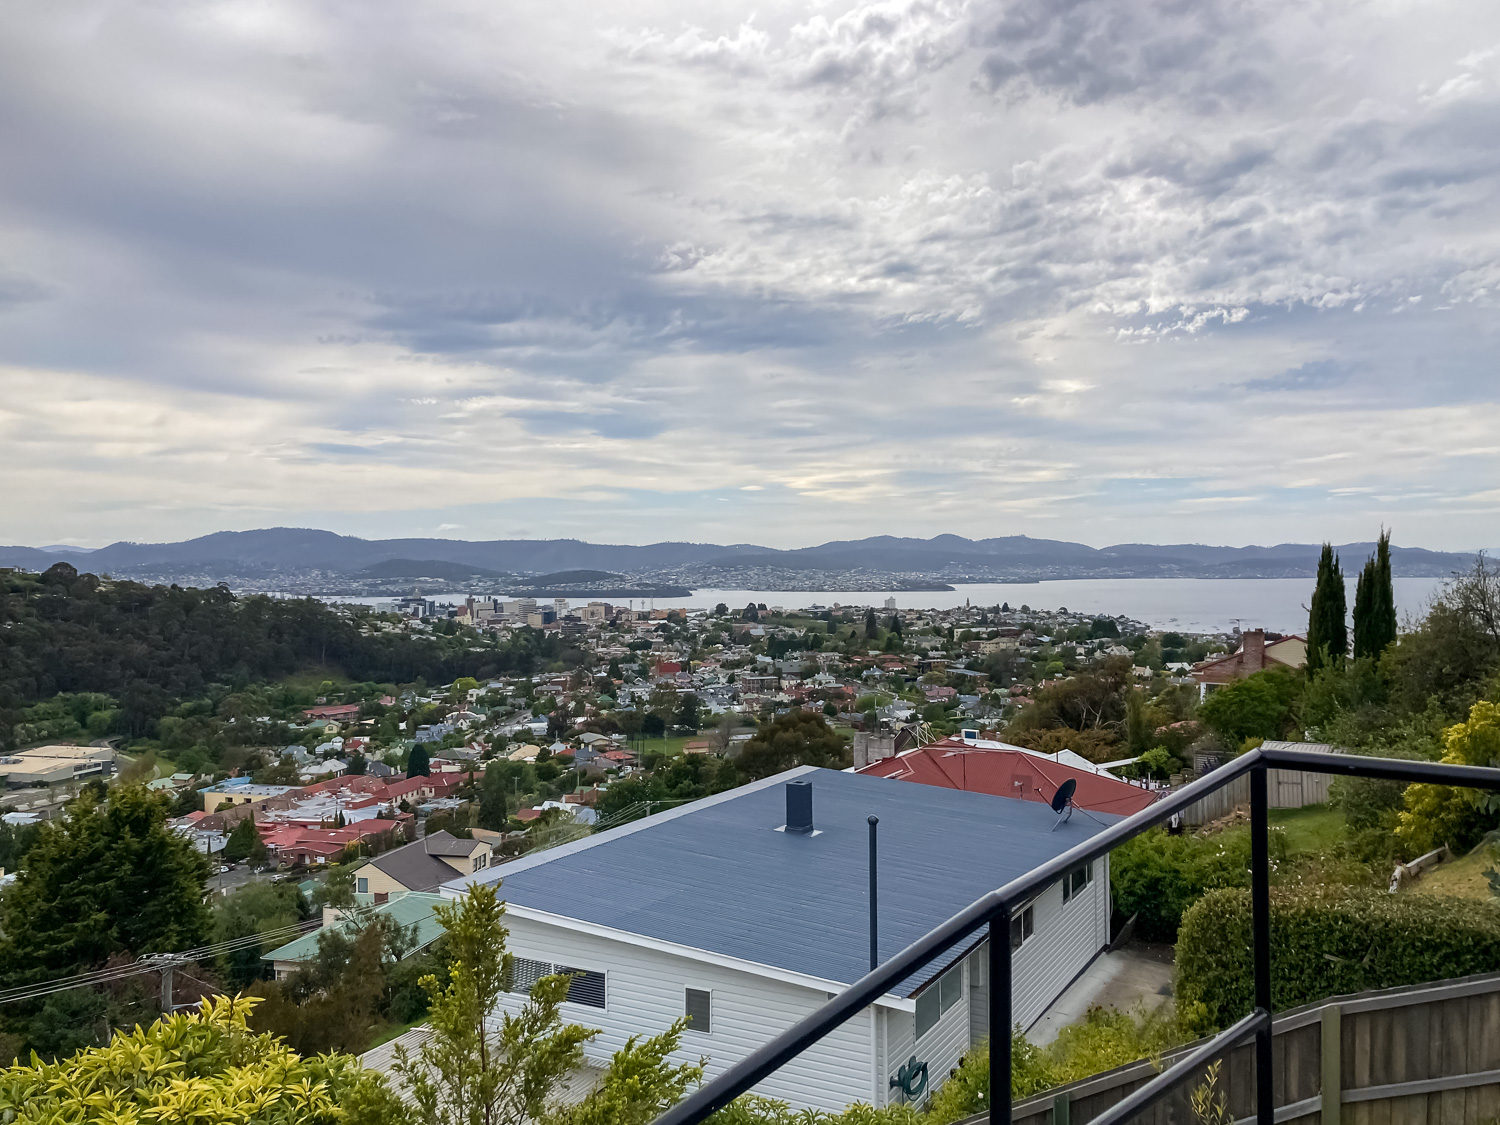 View overlooking Hobart with a white house and a rail in the foreground, the river and hills in the background